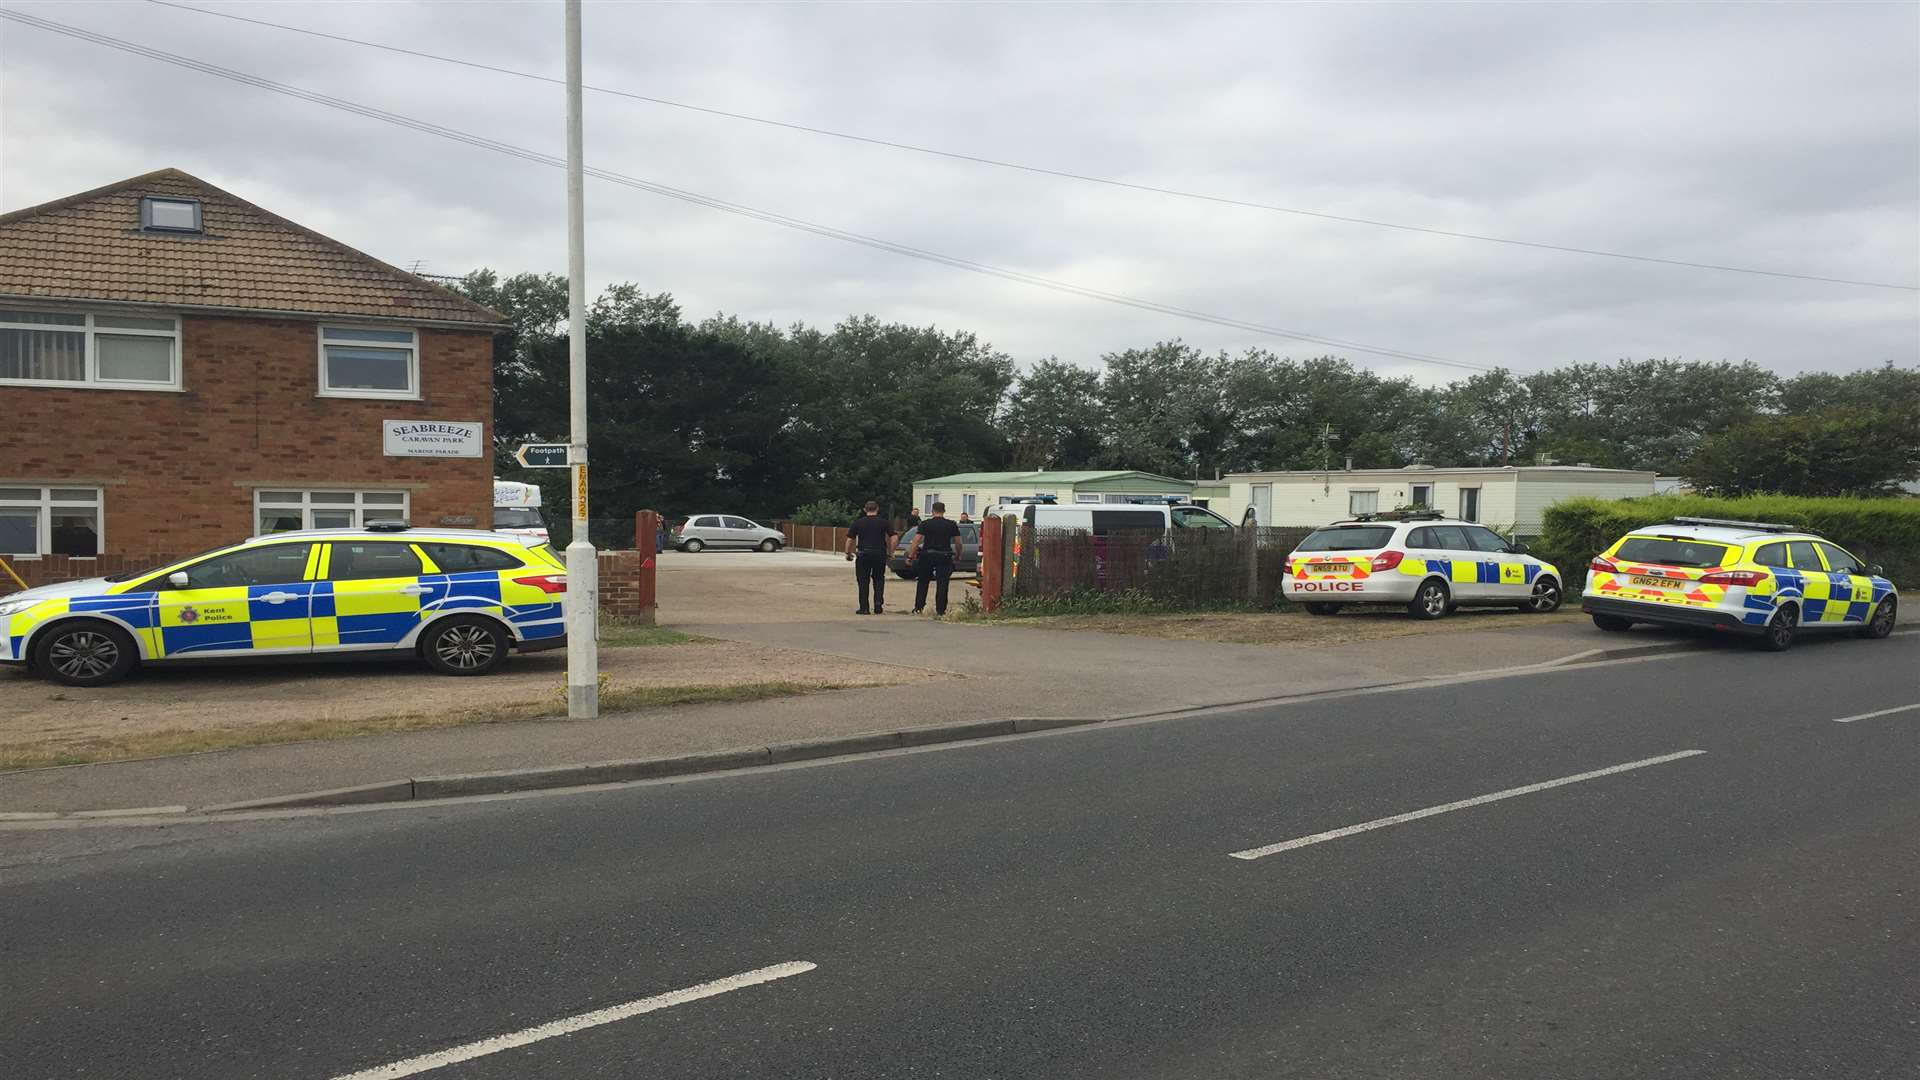 Police in Marine Parade, Sheerness